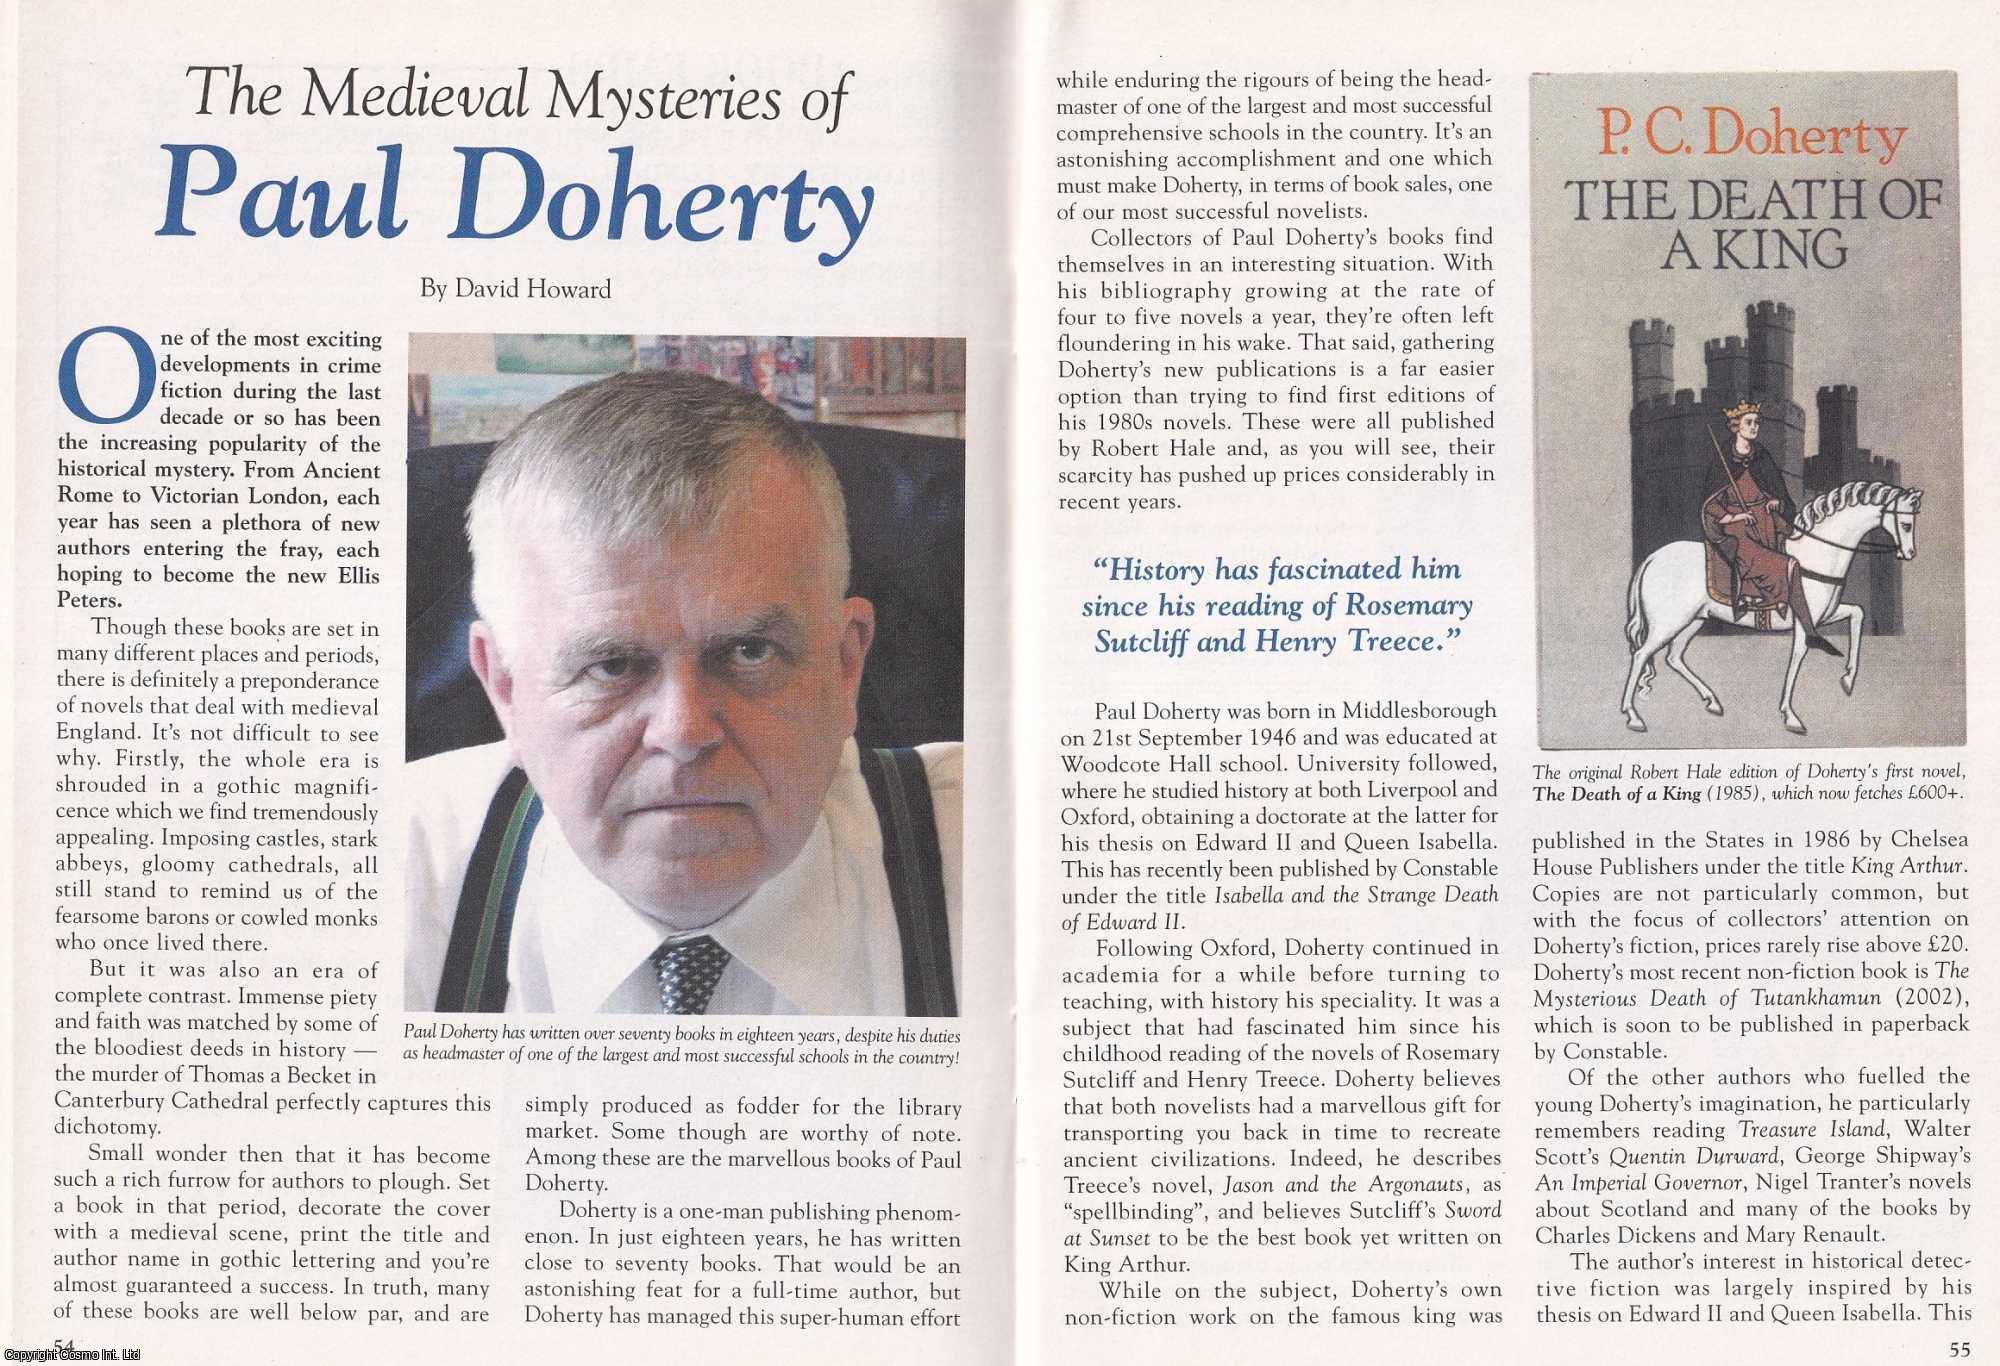 David Howard - The Medieval Mysteries of Paul Doherty. This is an original article separated from an issue of The Book & Magazine Collector publication.